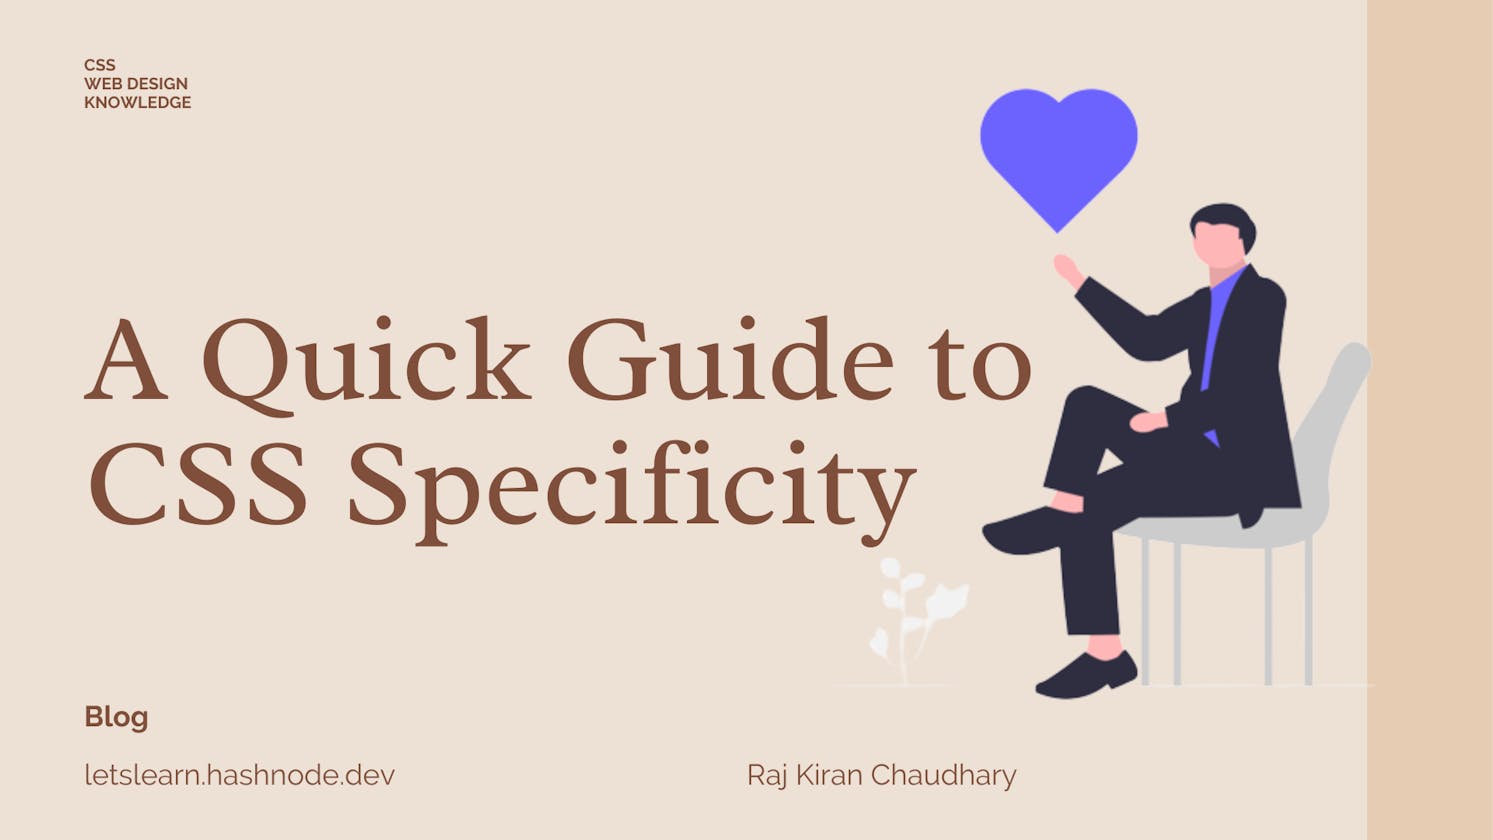 A Quick Guide to CSS Specificity